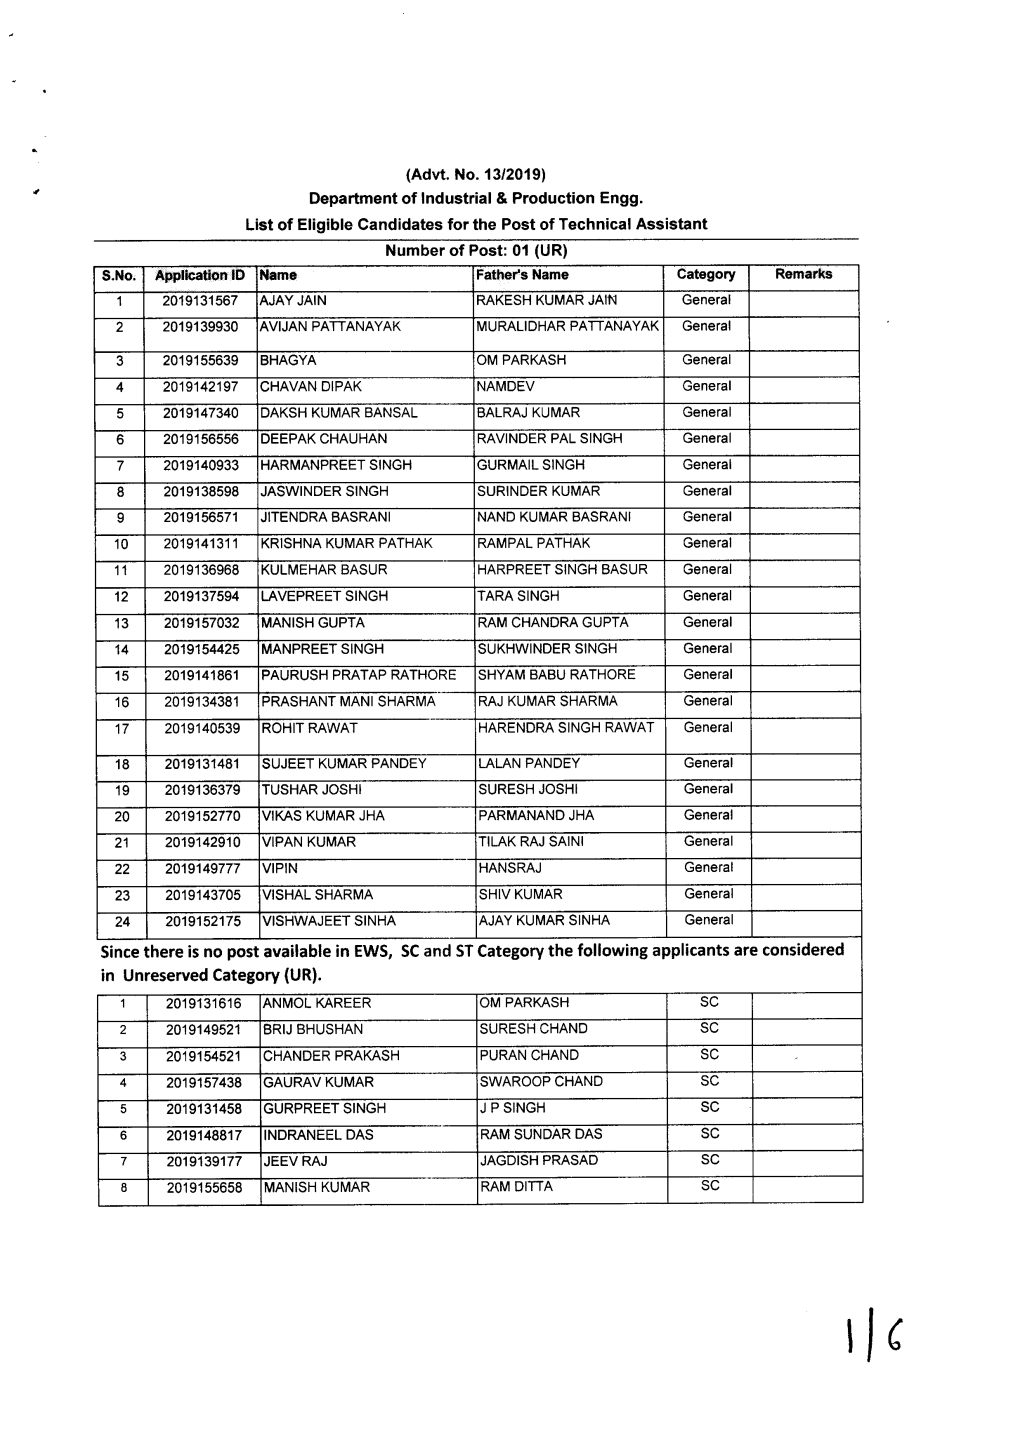 Department of Industrial & Production Engg. List of Eligible Candidates For